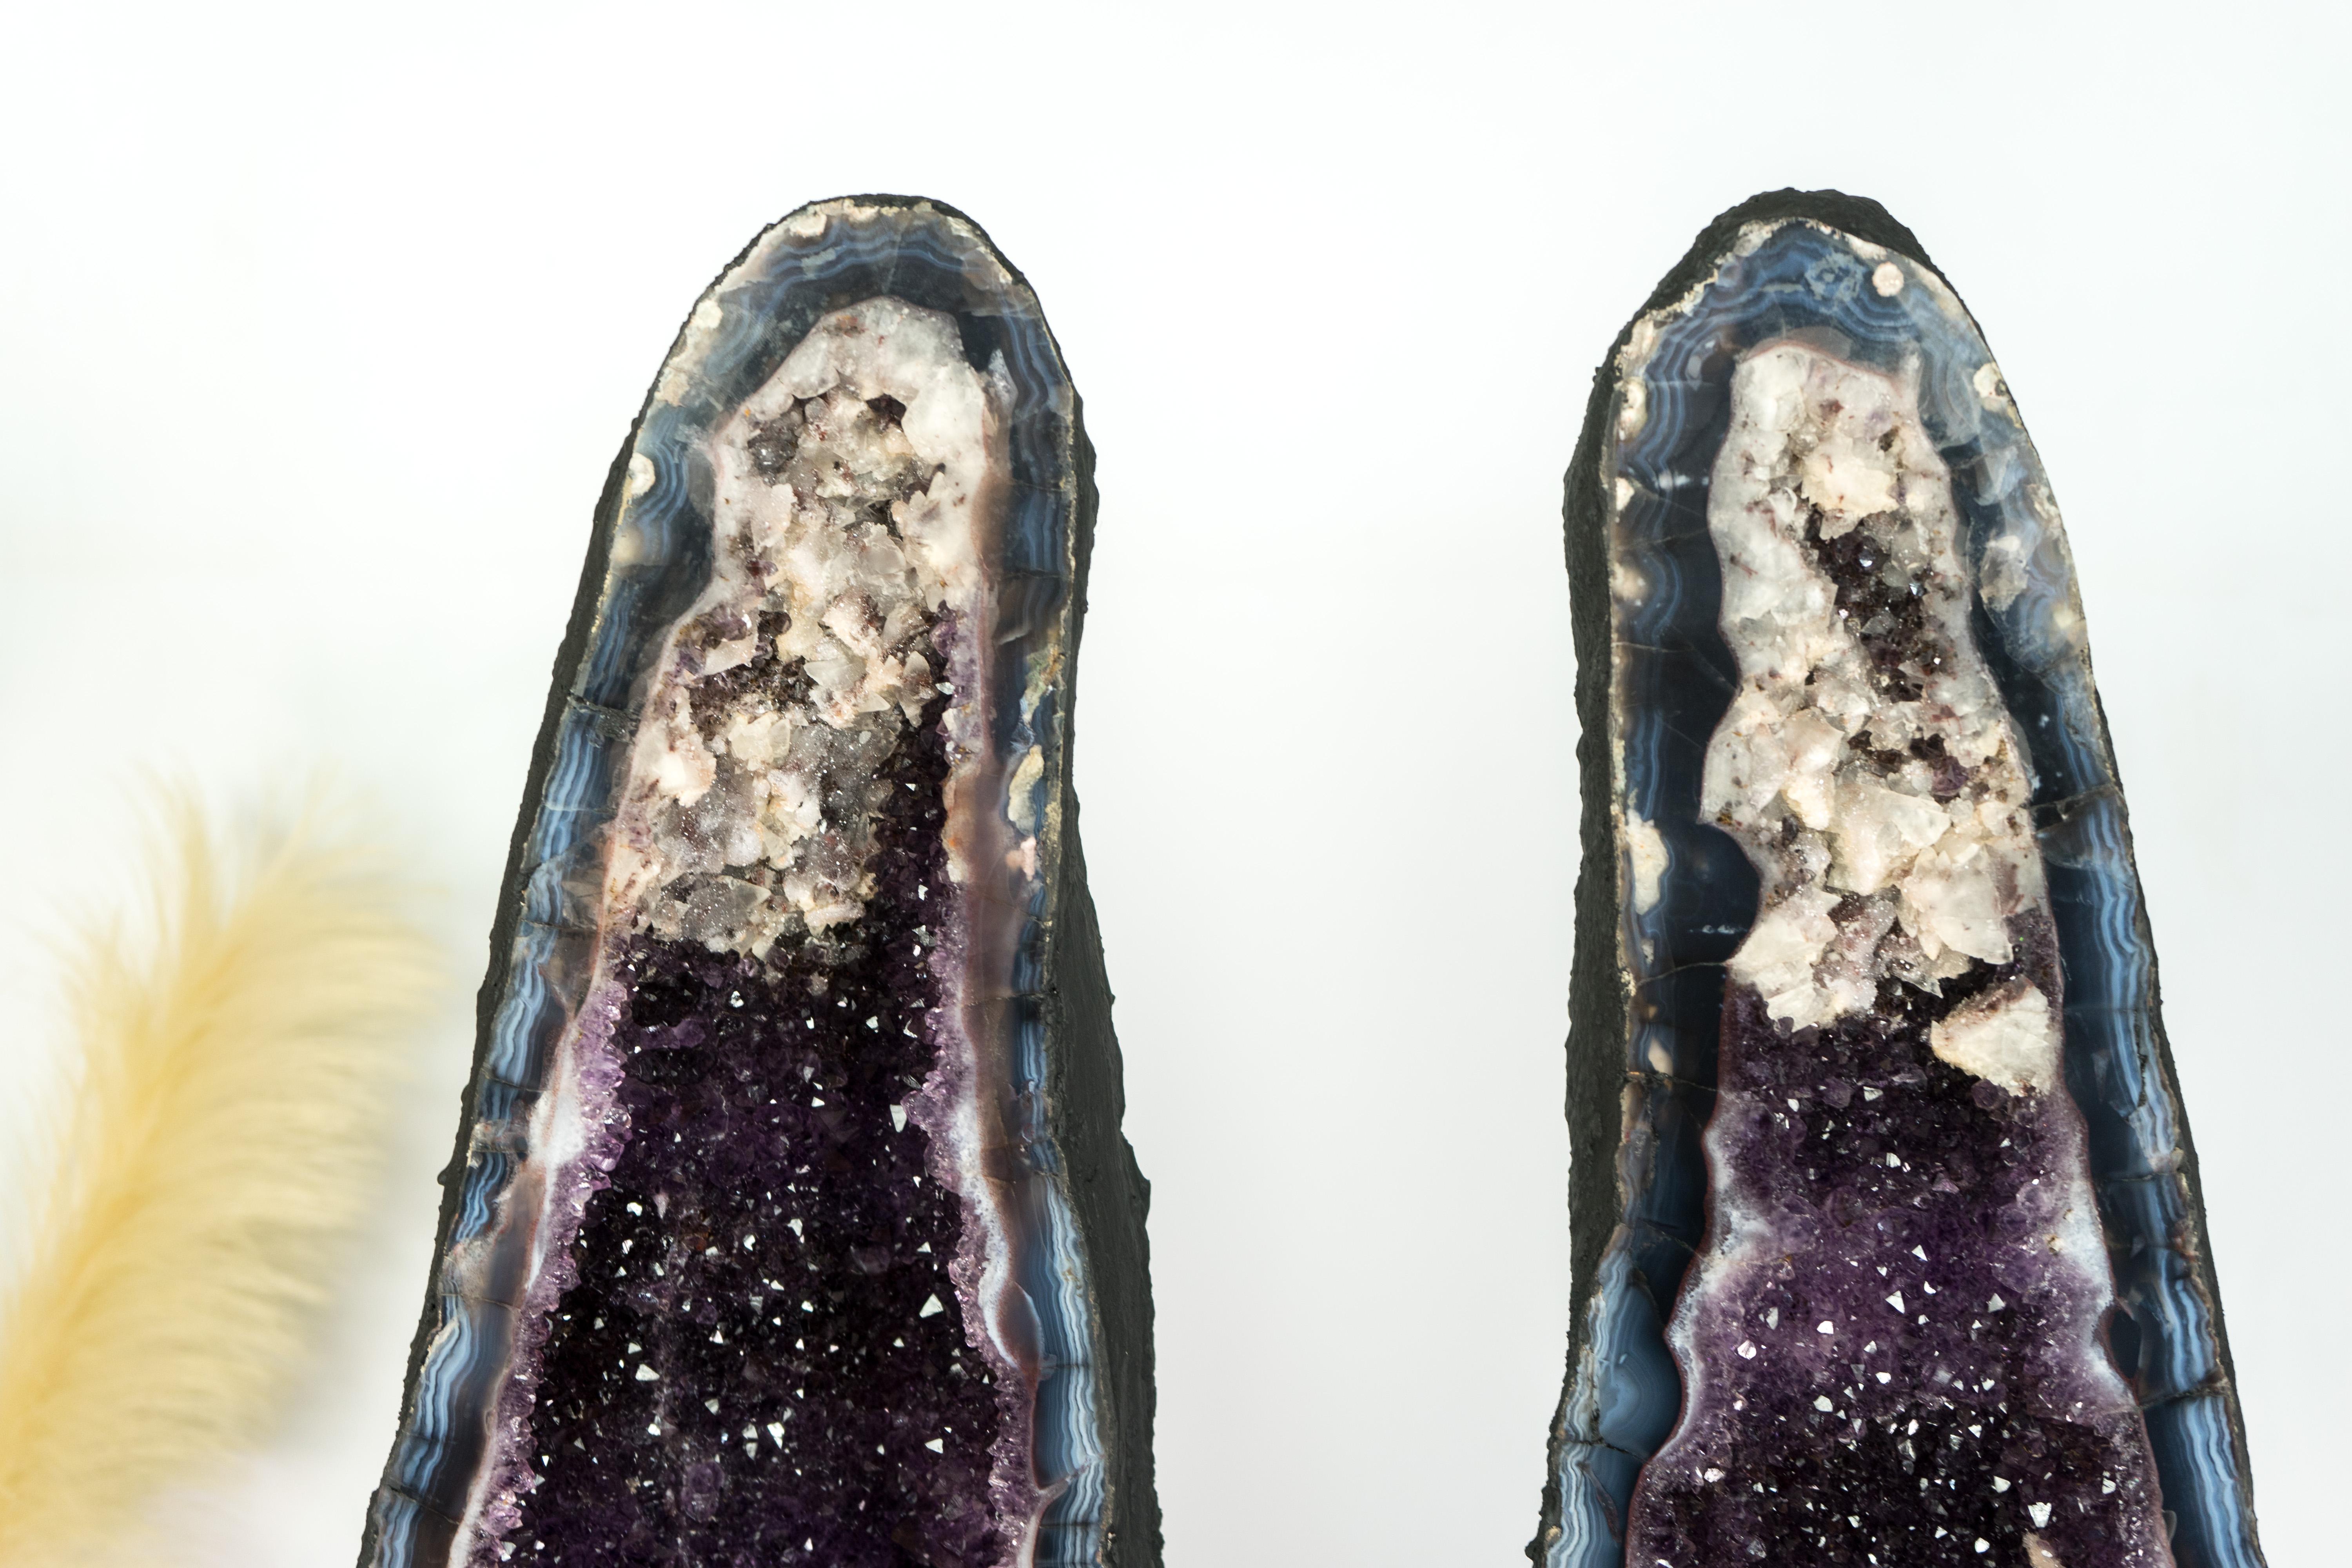 Pair of Amethyst Cathedral Geodes, with Lace Agate, Purple Amethyst, and Calcite For Sale 3